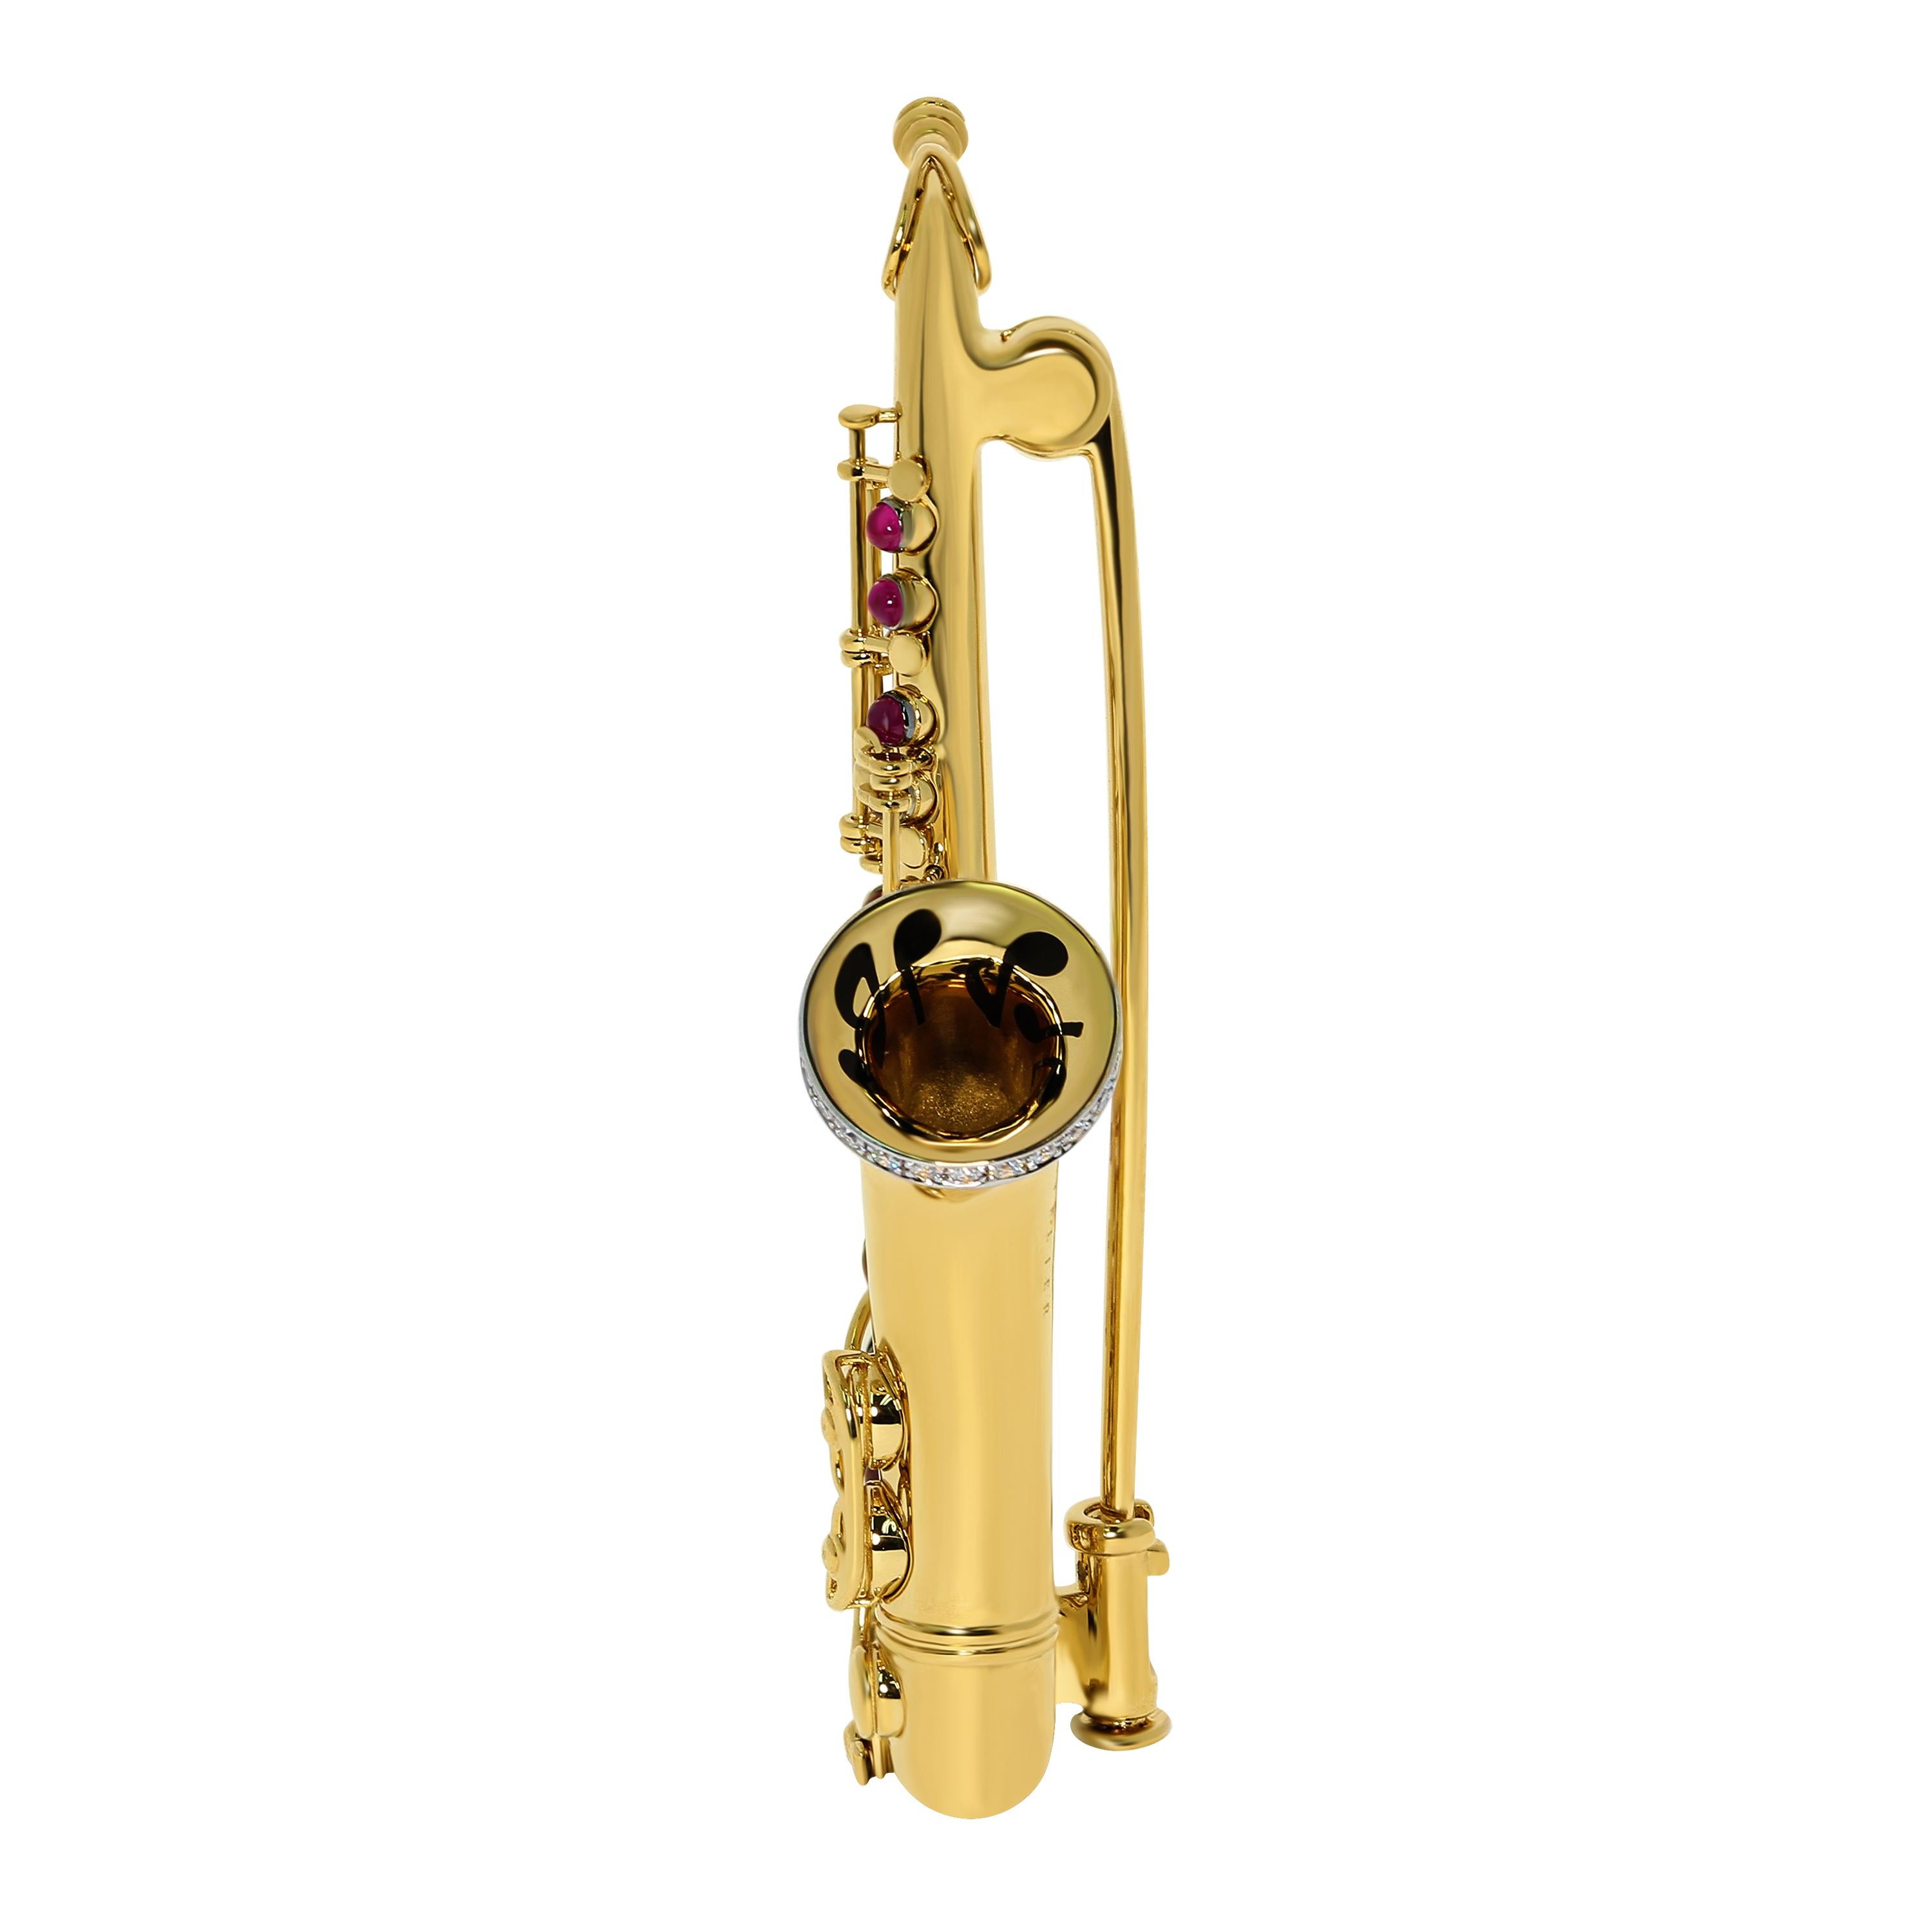 Diamonds Rubies Saxophone 18 karat Yellow Gold Brooch
In the ranks of our musical instruments replenishment. What comes to mind when you mention such names as Charlie Parker, John Coltrane or Sonny Rollins?
Of course, the saxophone! The instrument